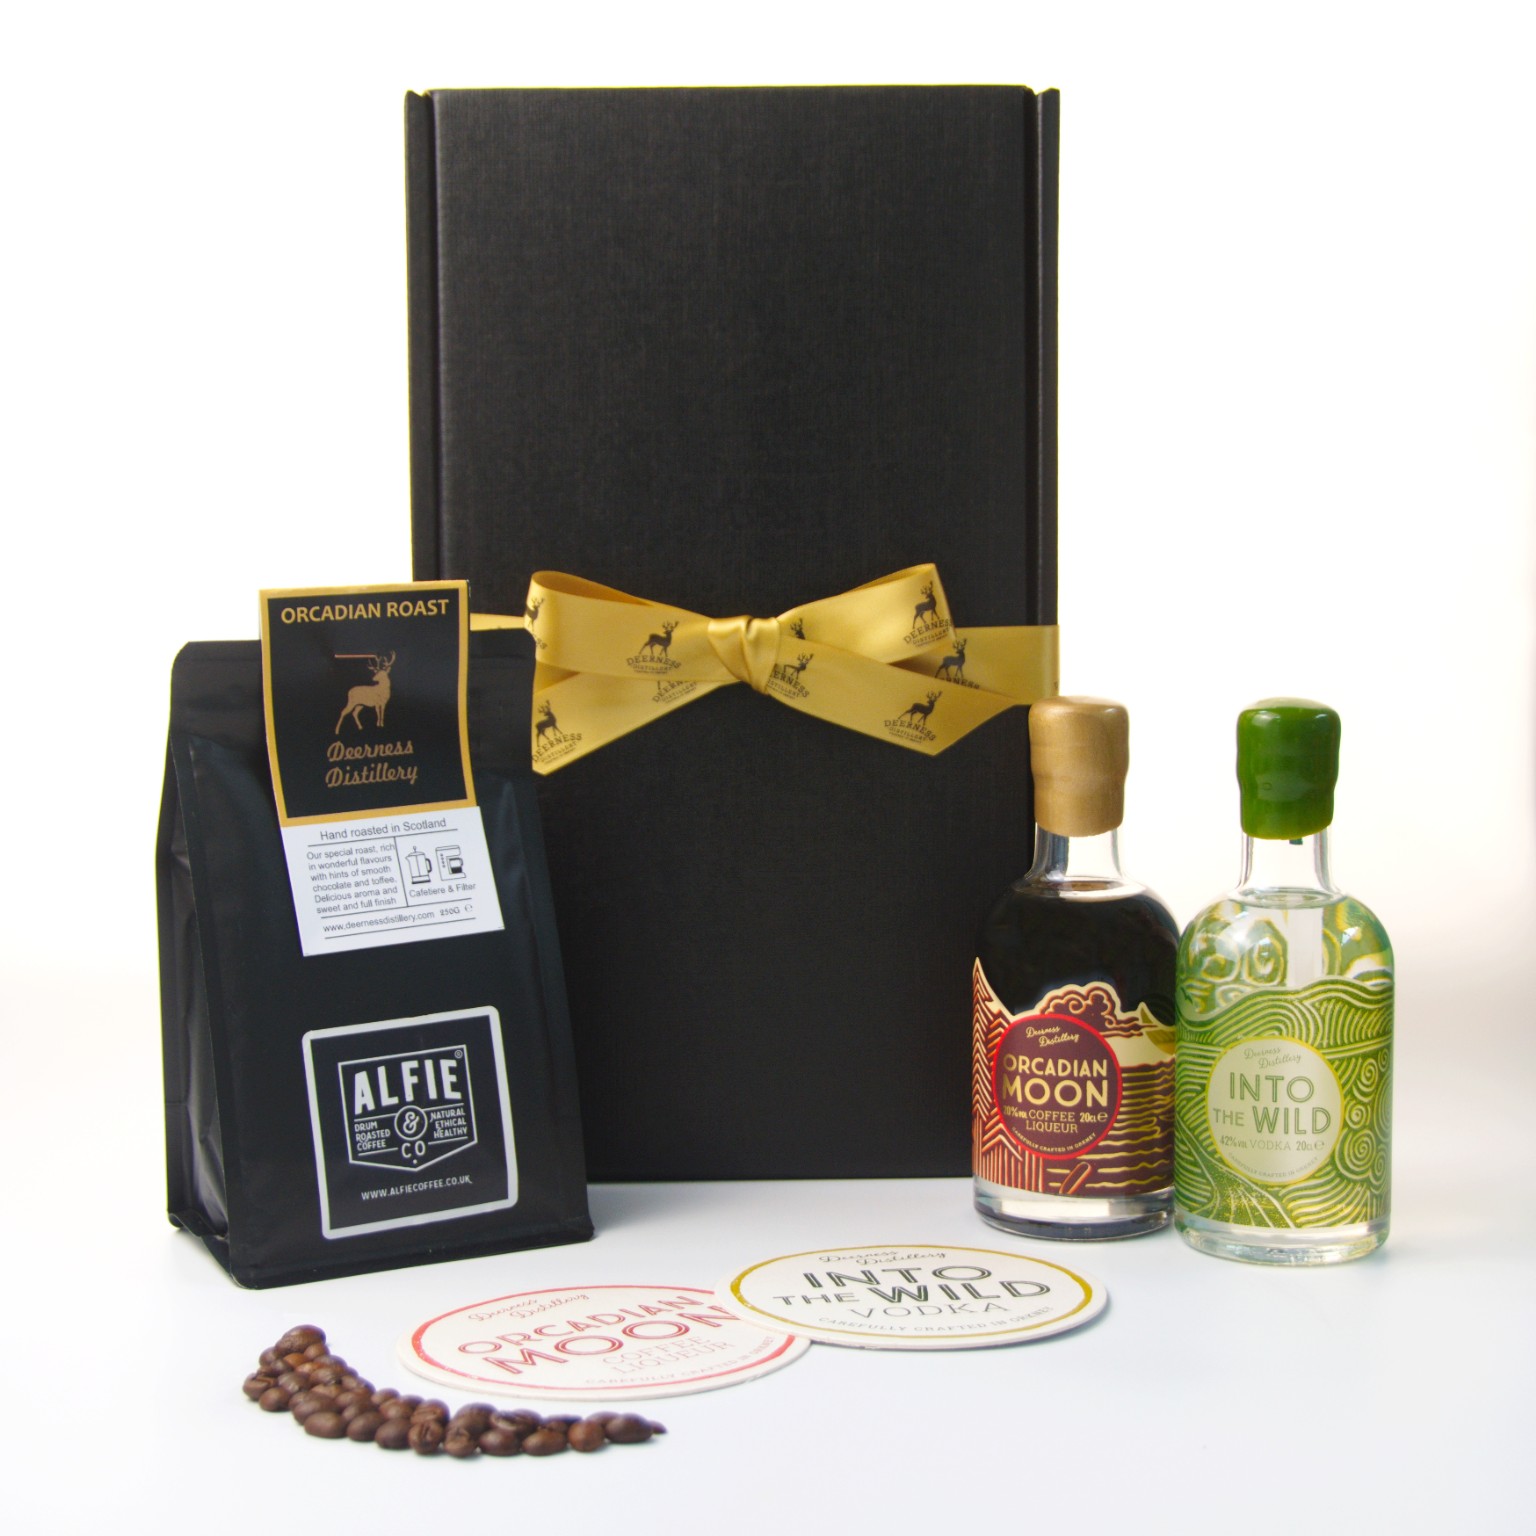 Espresso Martini kit from the Deerness Distillery